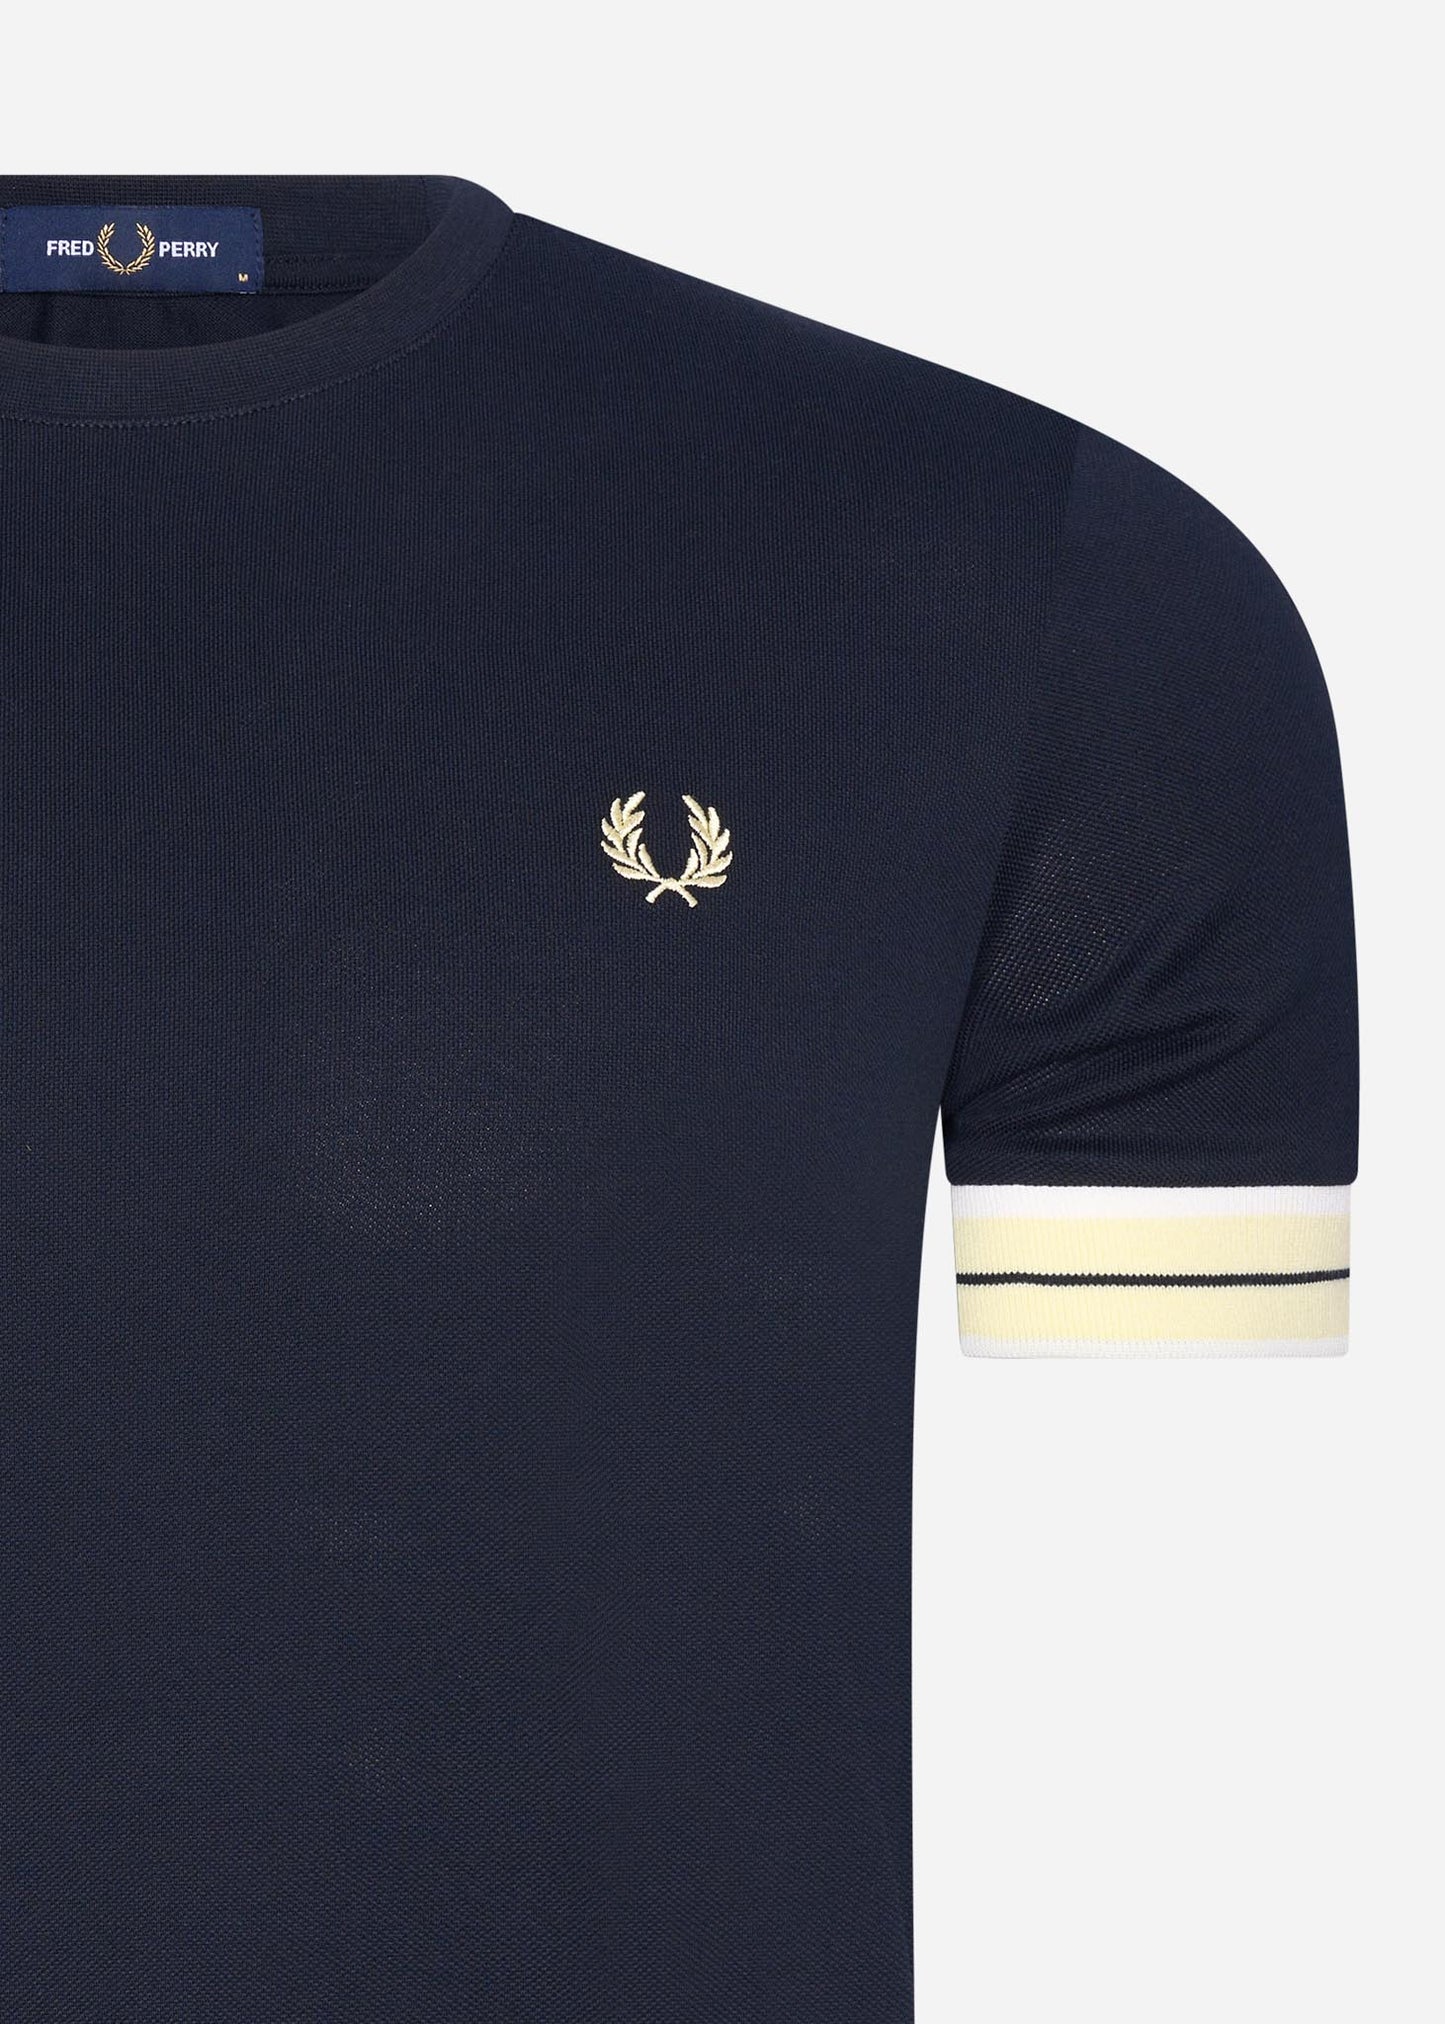 Fred Perry T-shirts  Tramline tipped pique t-shirt - navy 